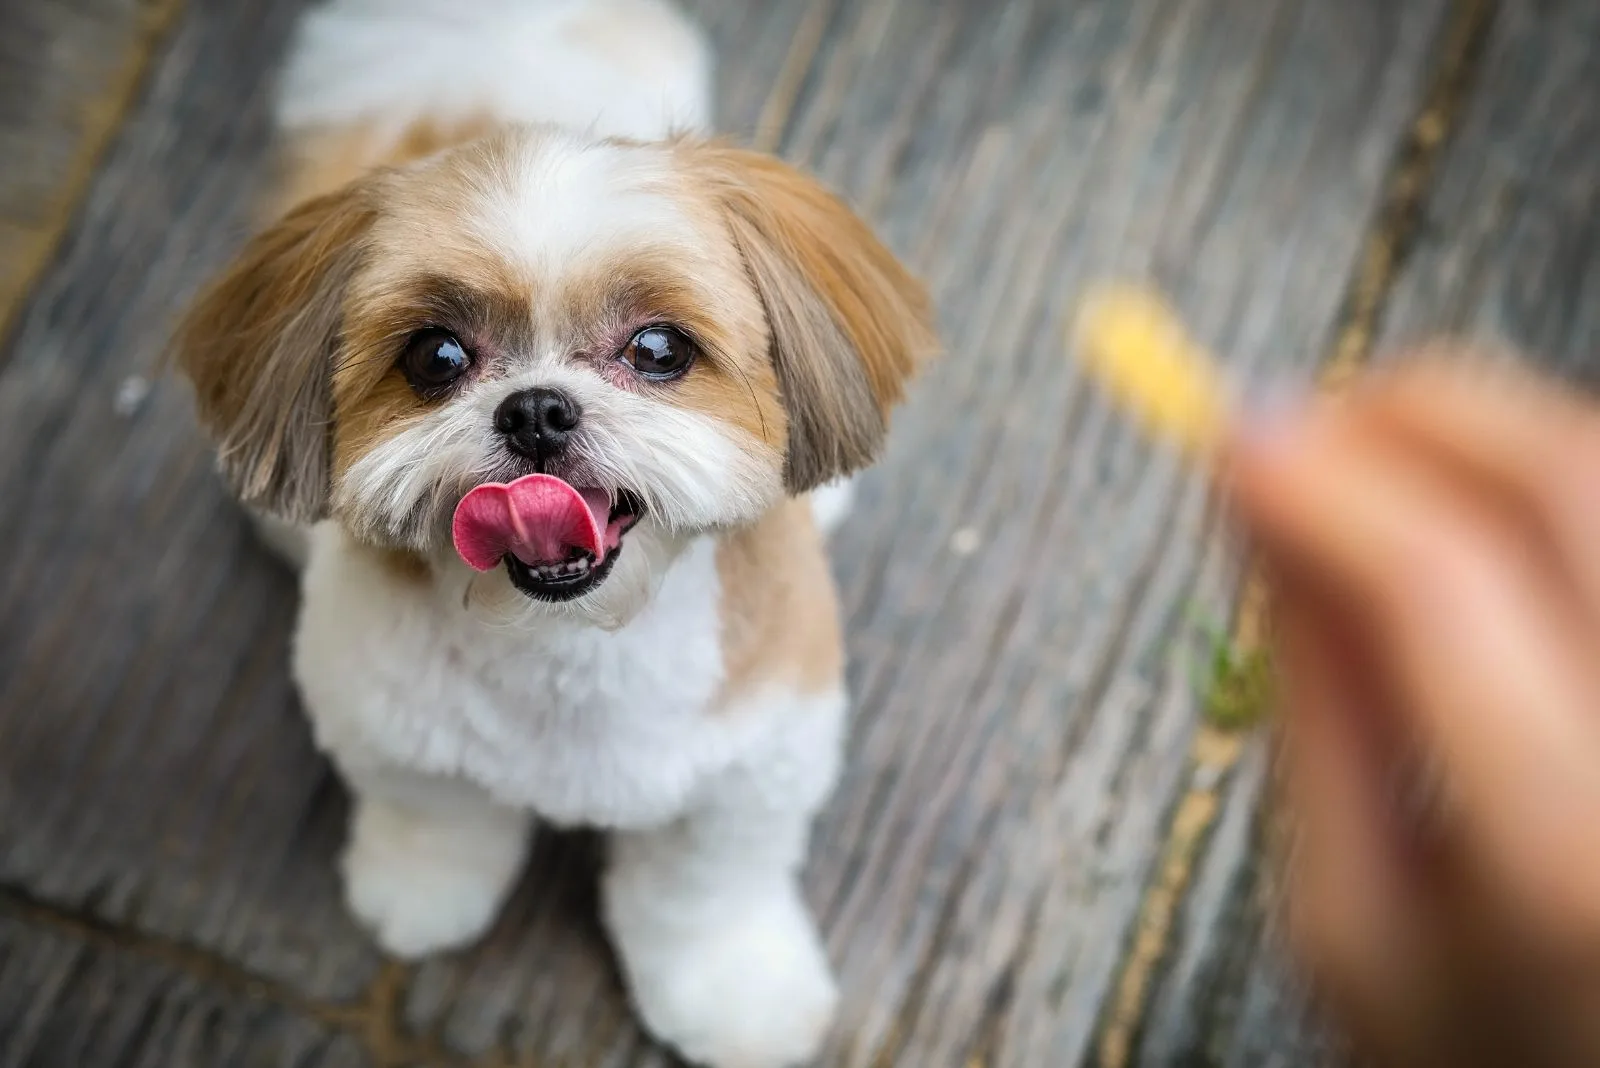 shih tzu dog is looking a snack